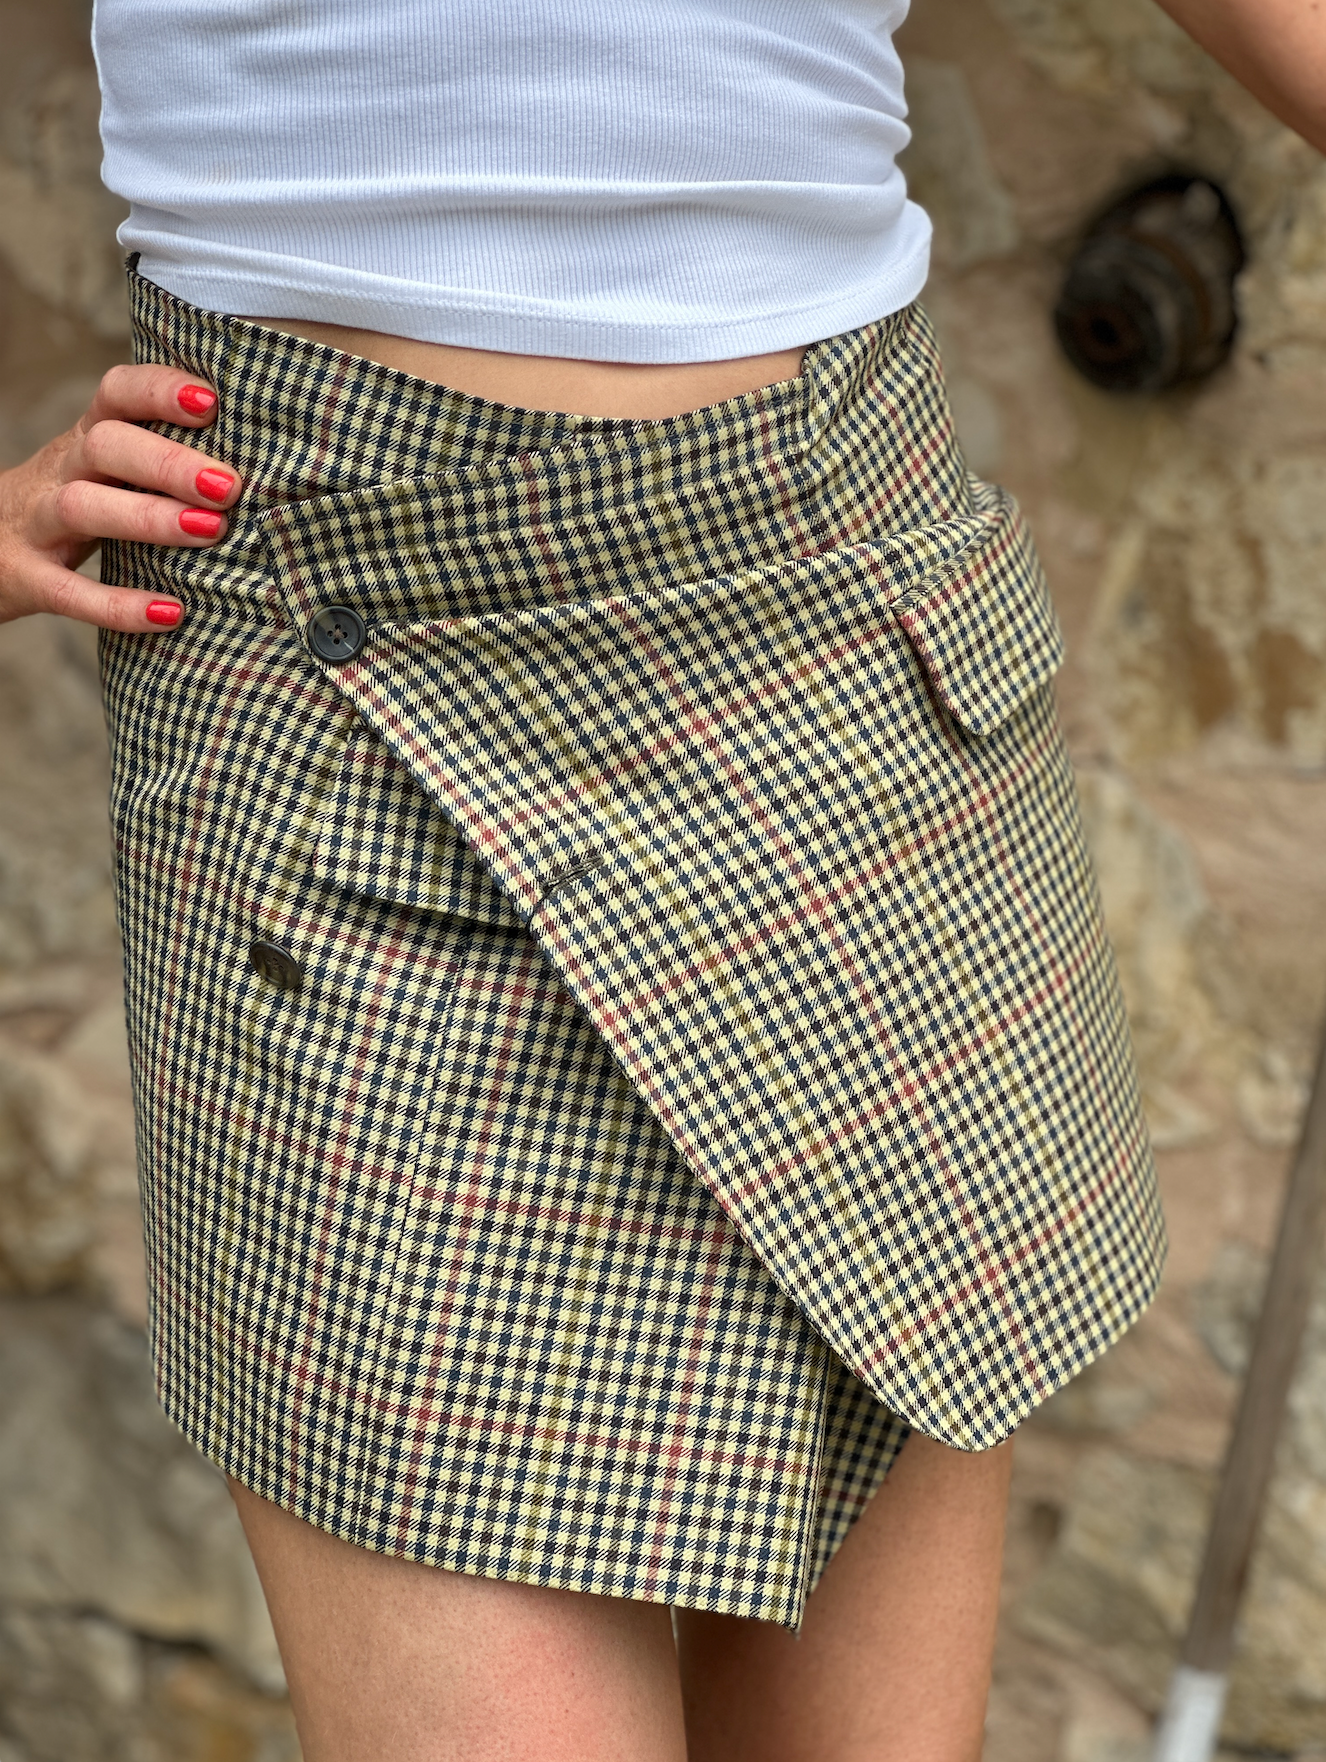 Cropped Burberry skirt suit.